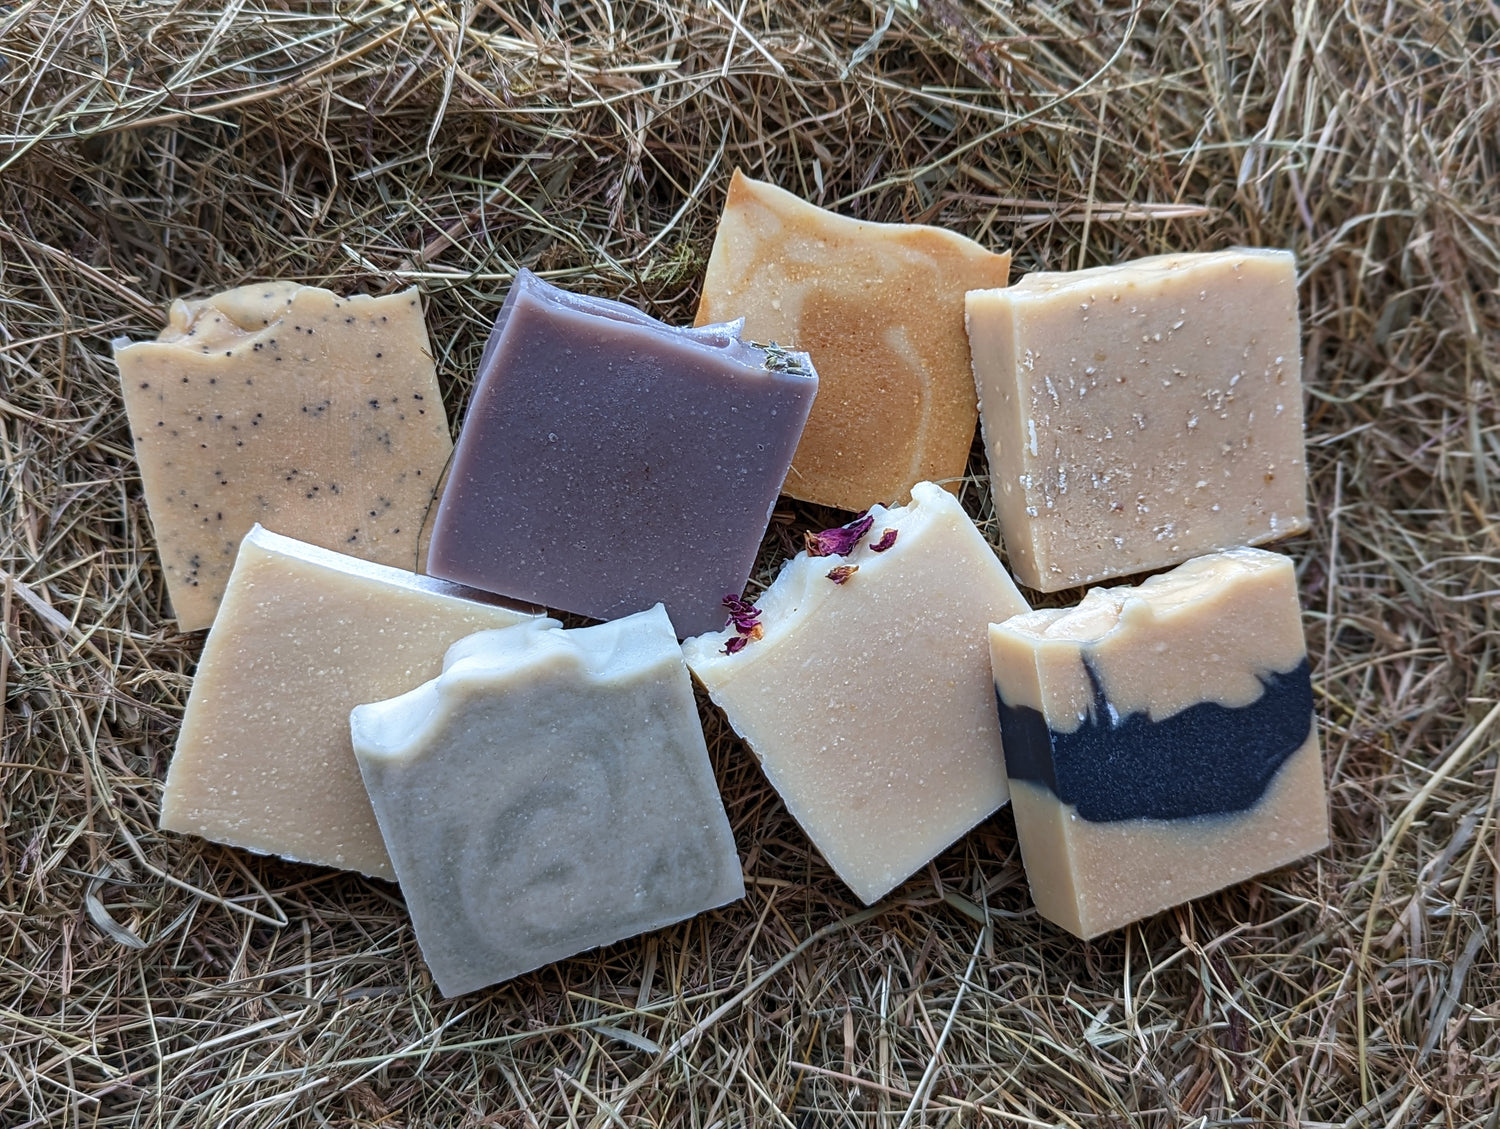 Handmade artisan sheep's milk soaps with natural ingredients and Whitefaced Woodland sheep milk